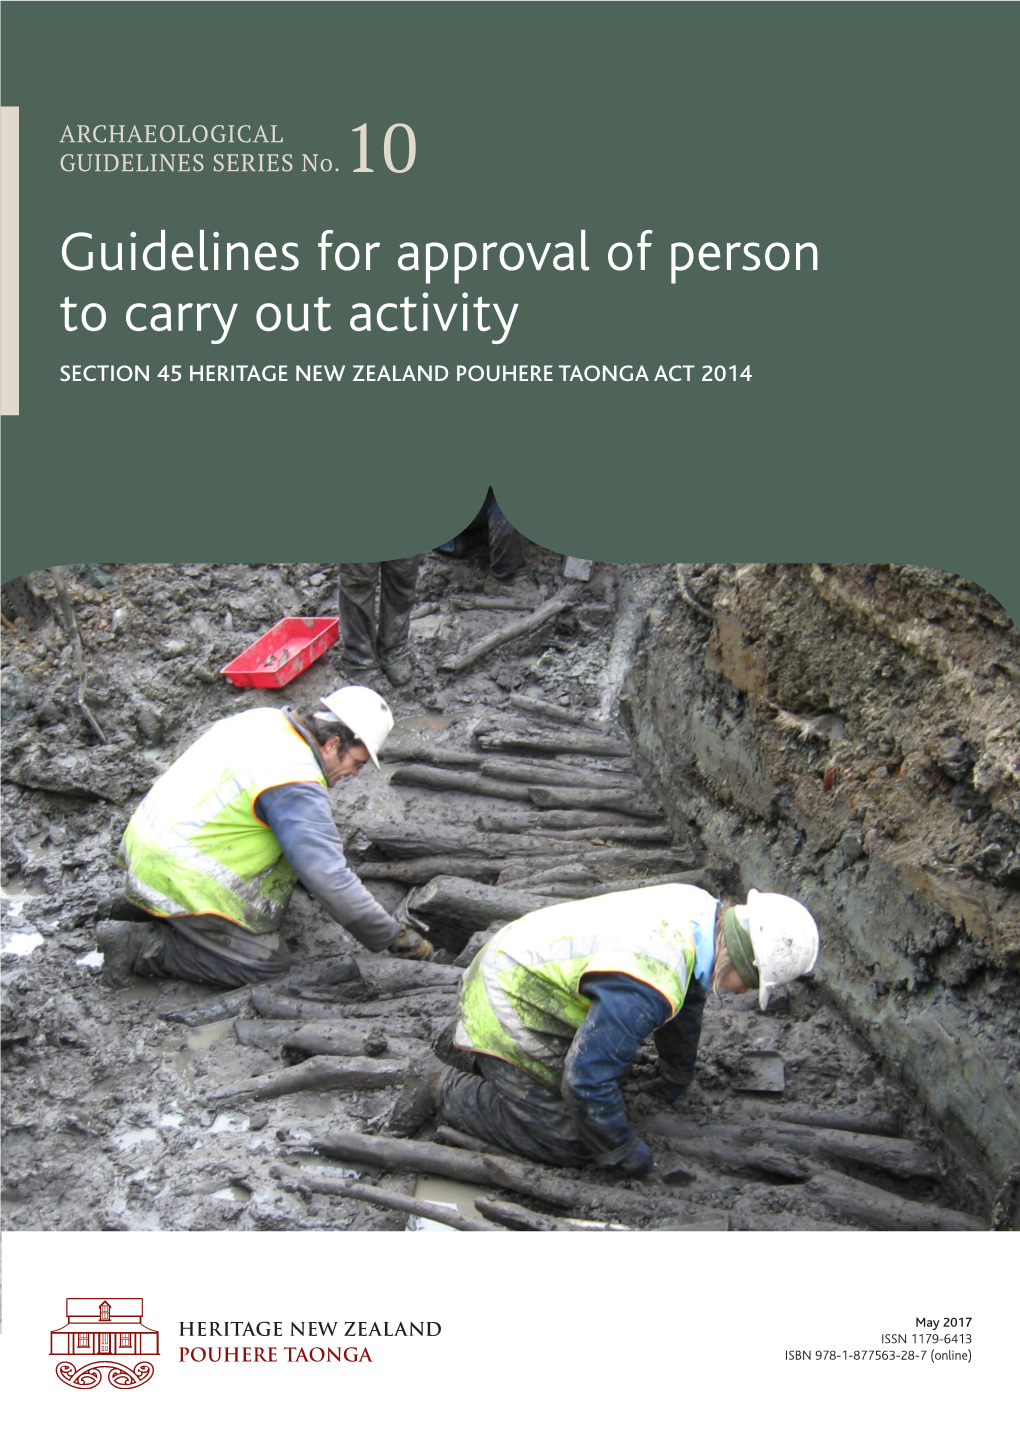 Guidelines for Approval of Person to Carry out Activity SECTION 45 HERITAGE NEW ZEALAND POUHERE TAONGA ACT 2014